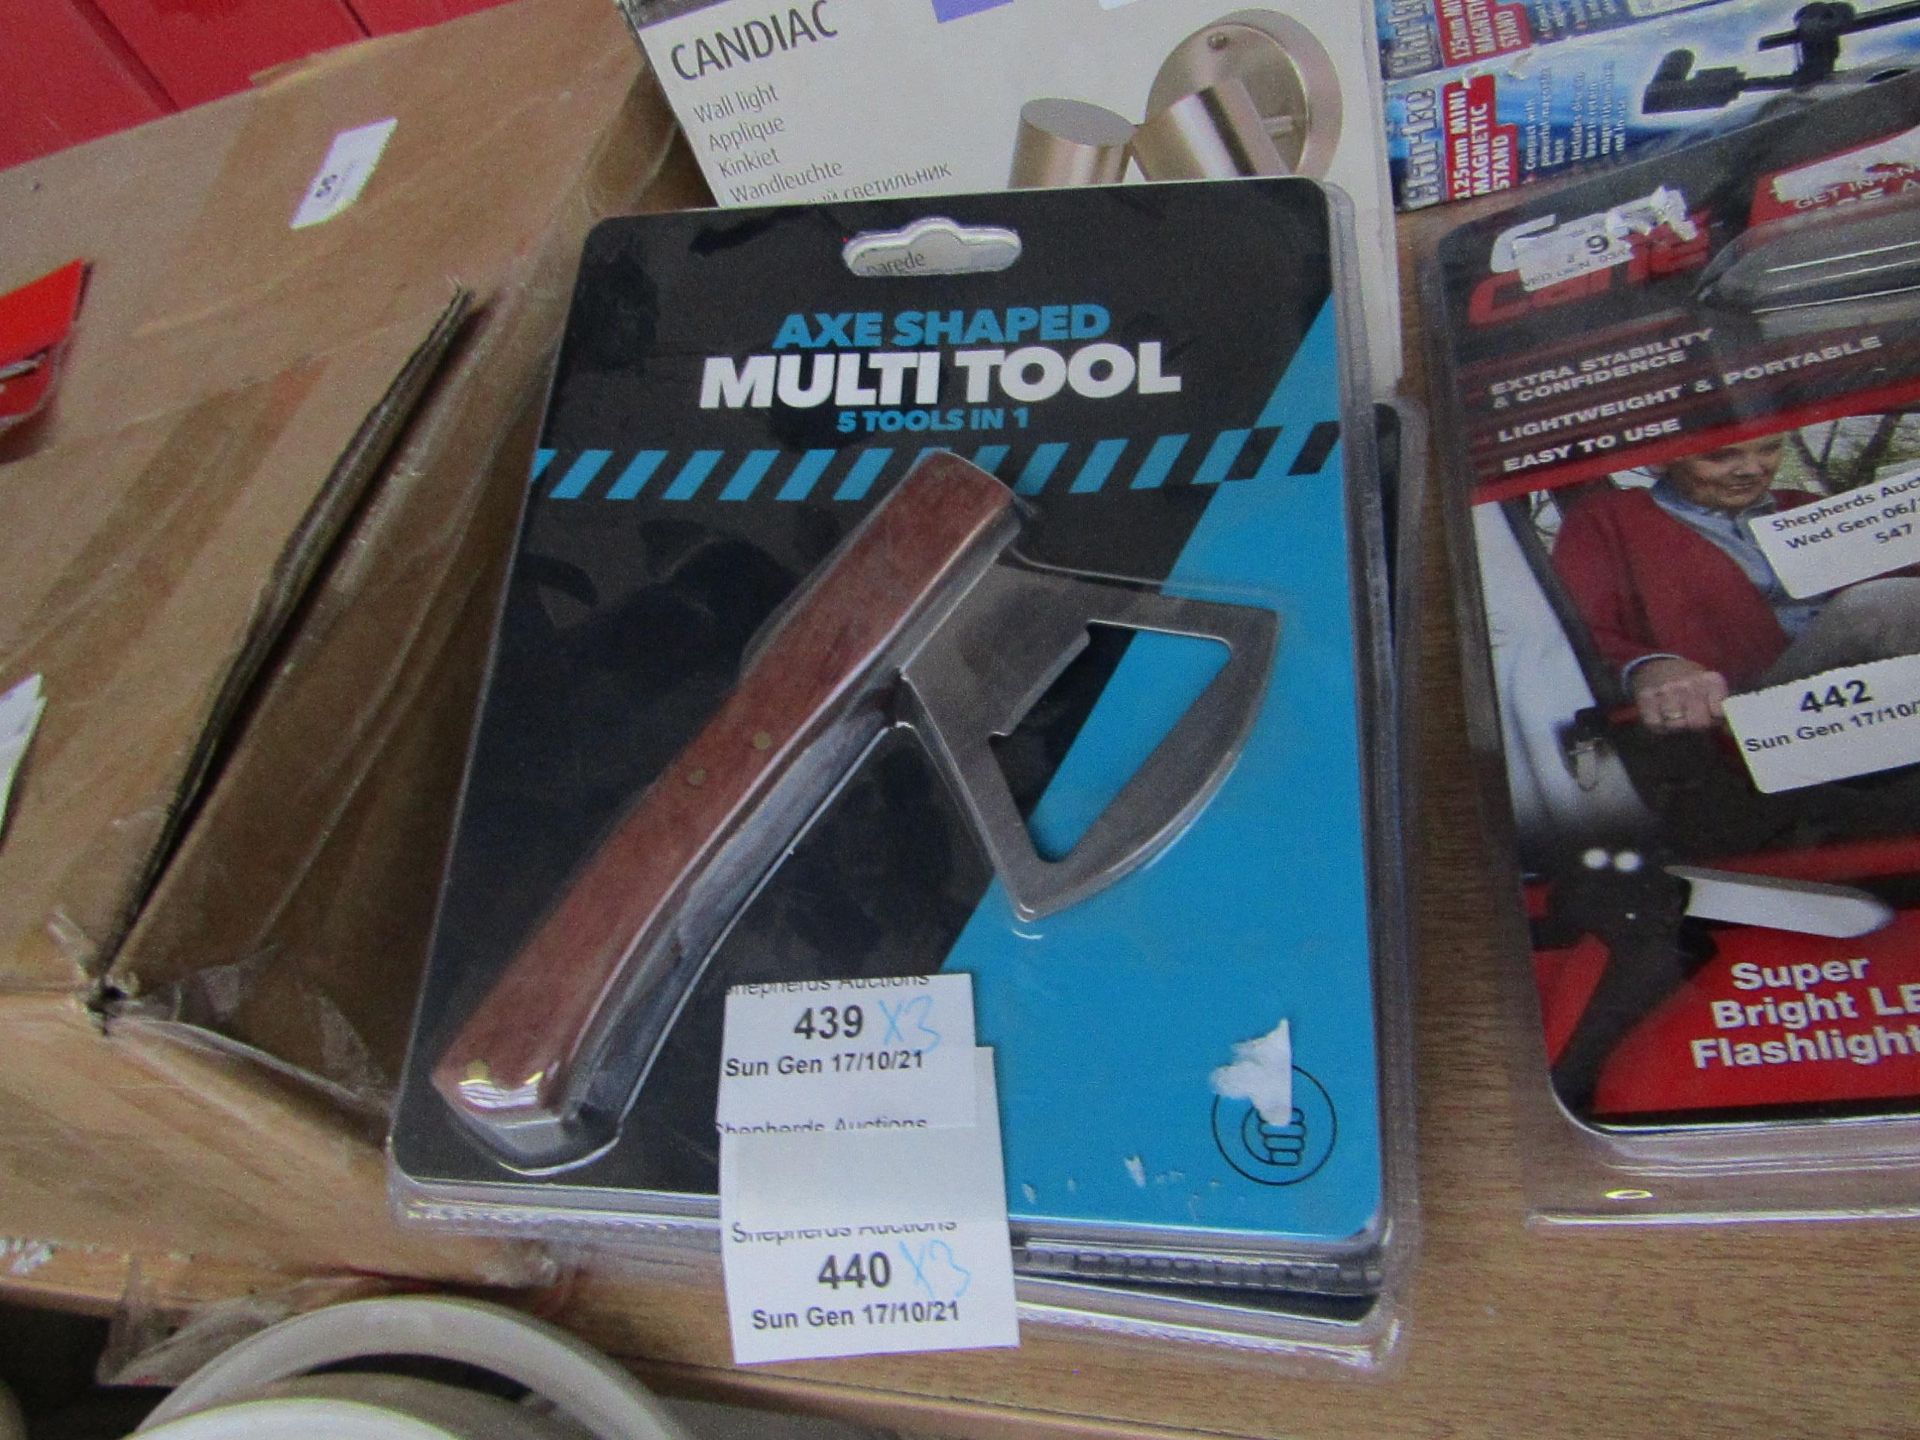 3x Axe Shaped Multitool - 5 Tools in 1 - New & Boxed